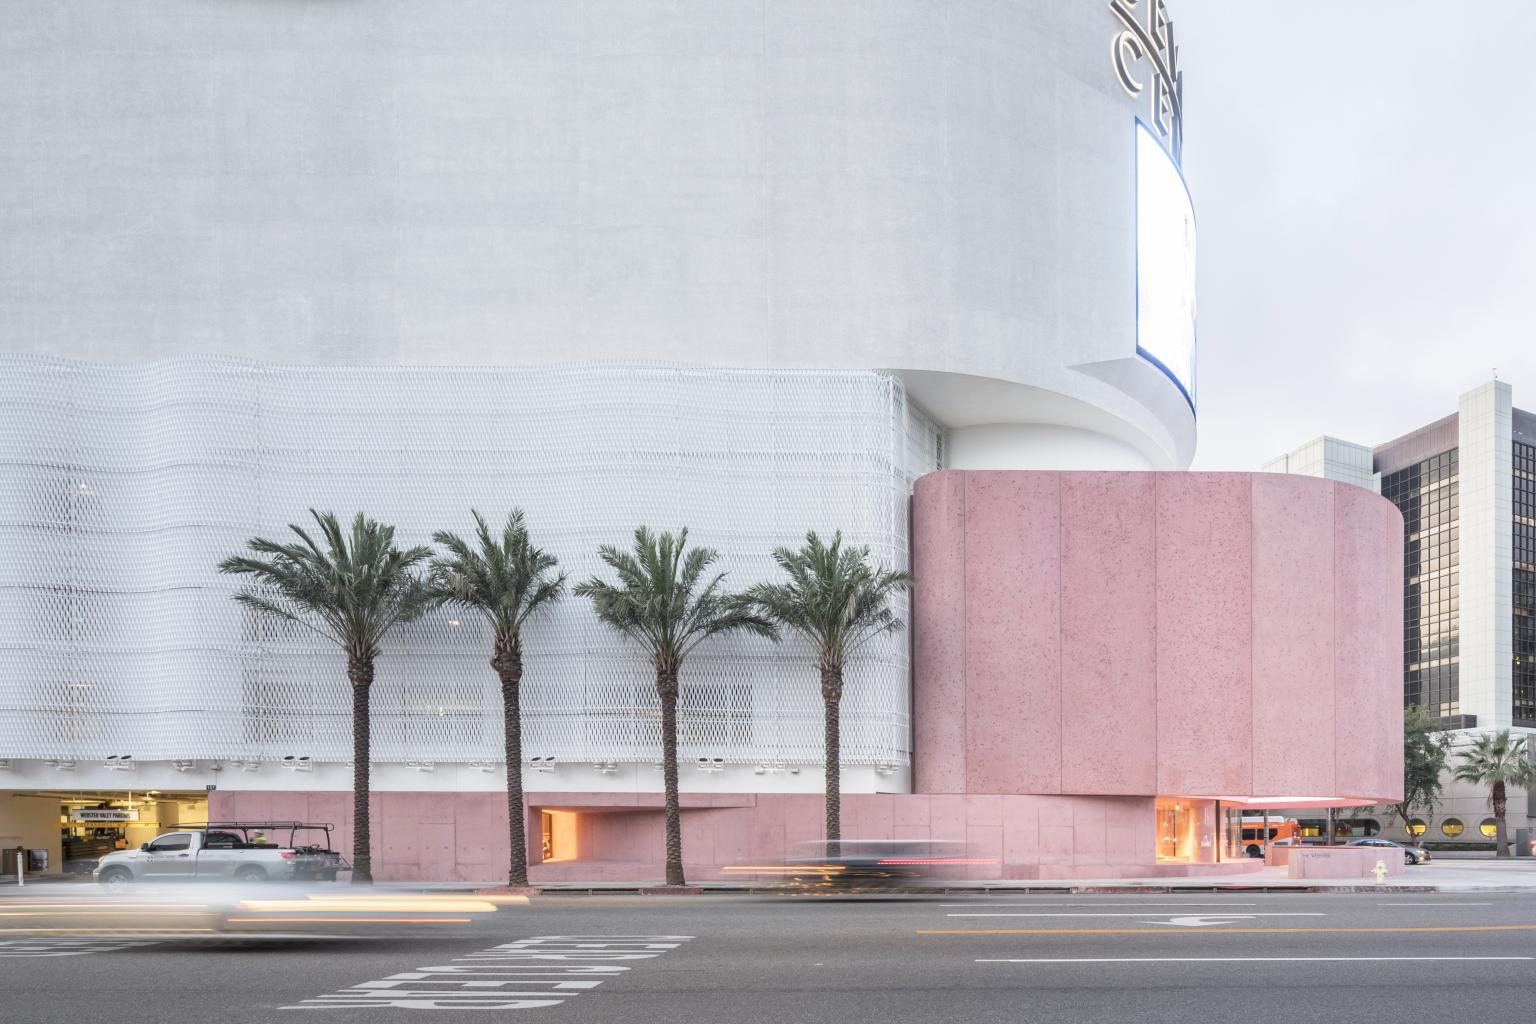 Experiencing Los Angeles: Experiencing L.A. at the Beverly Center